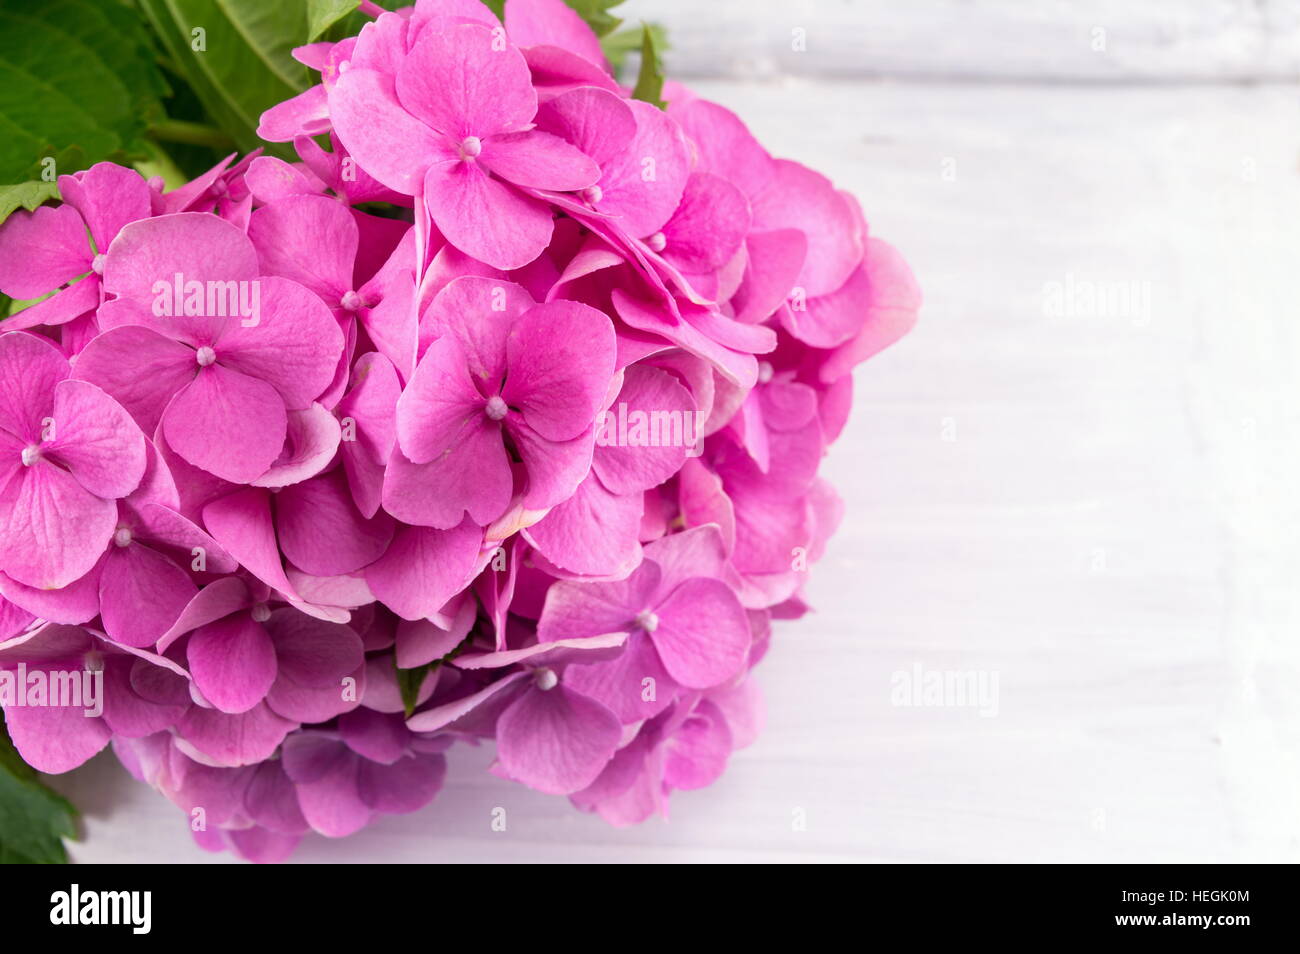 bunch of hortensia pink flowers on wooden background Stock Photo